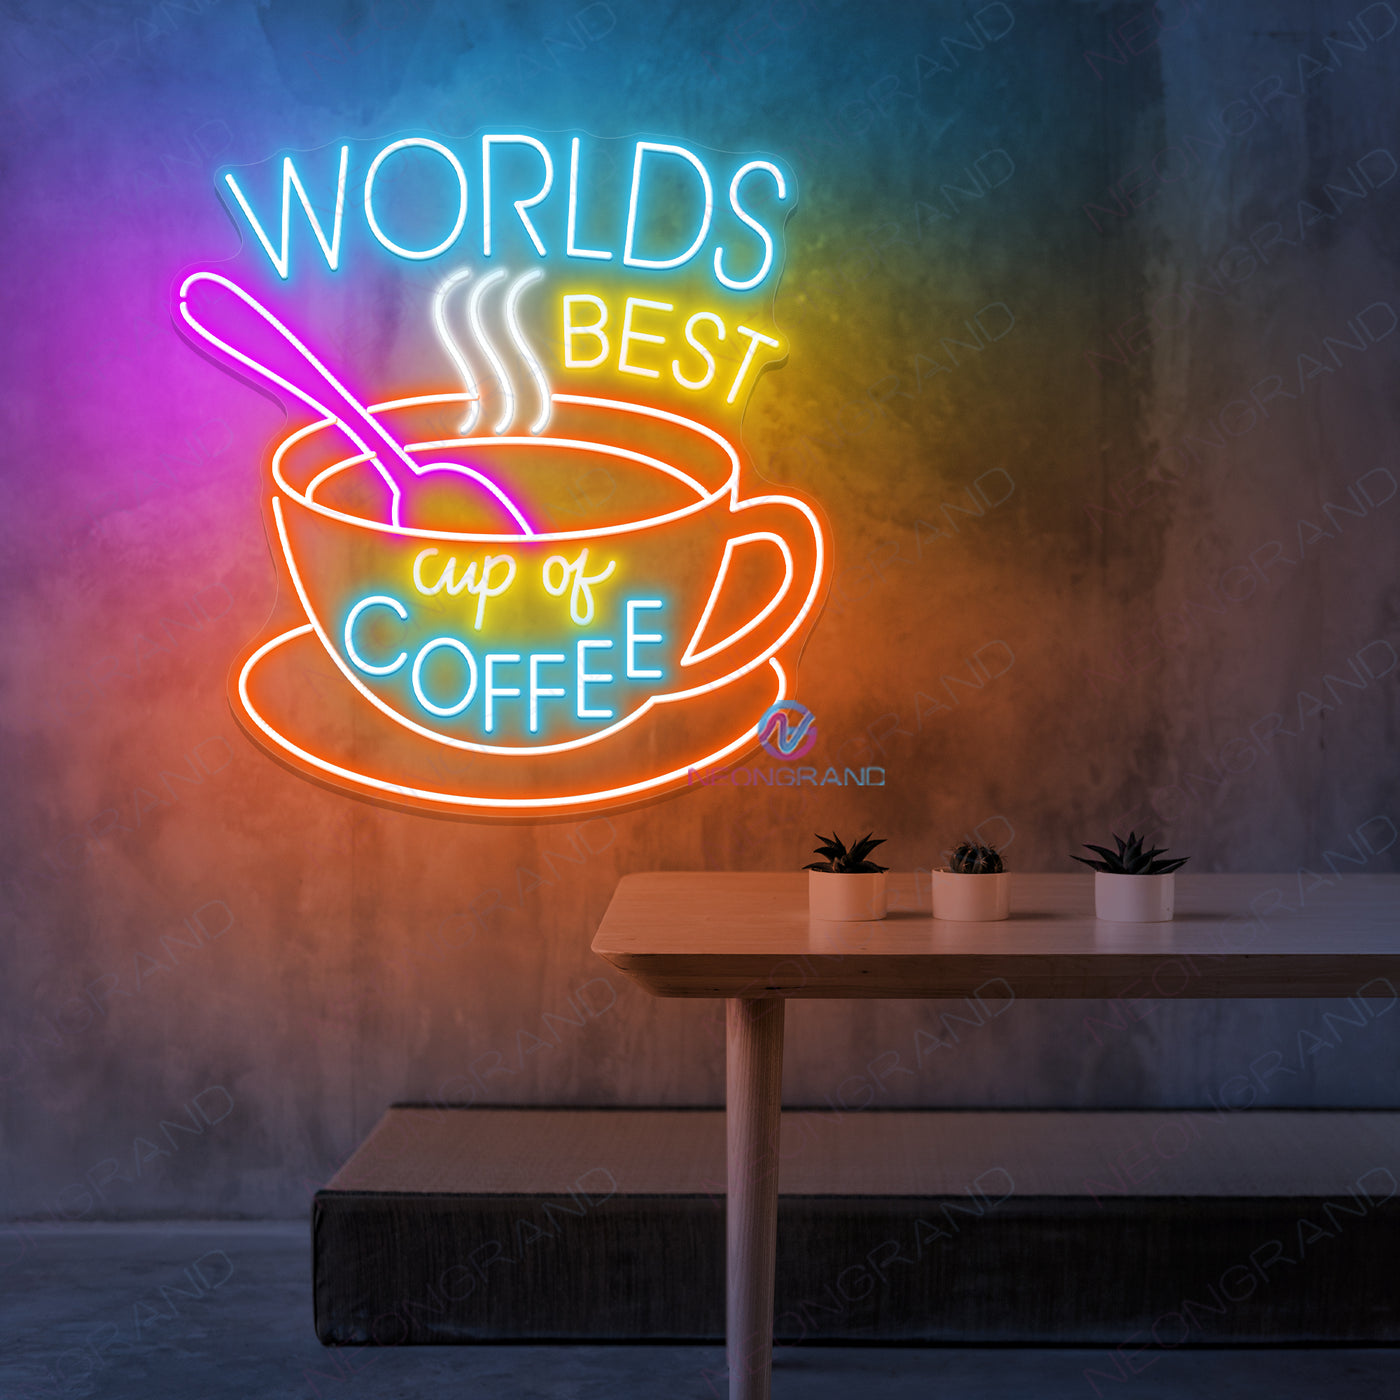 Worlds Best Cup of Coffee Neon Sign Led Light